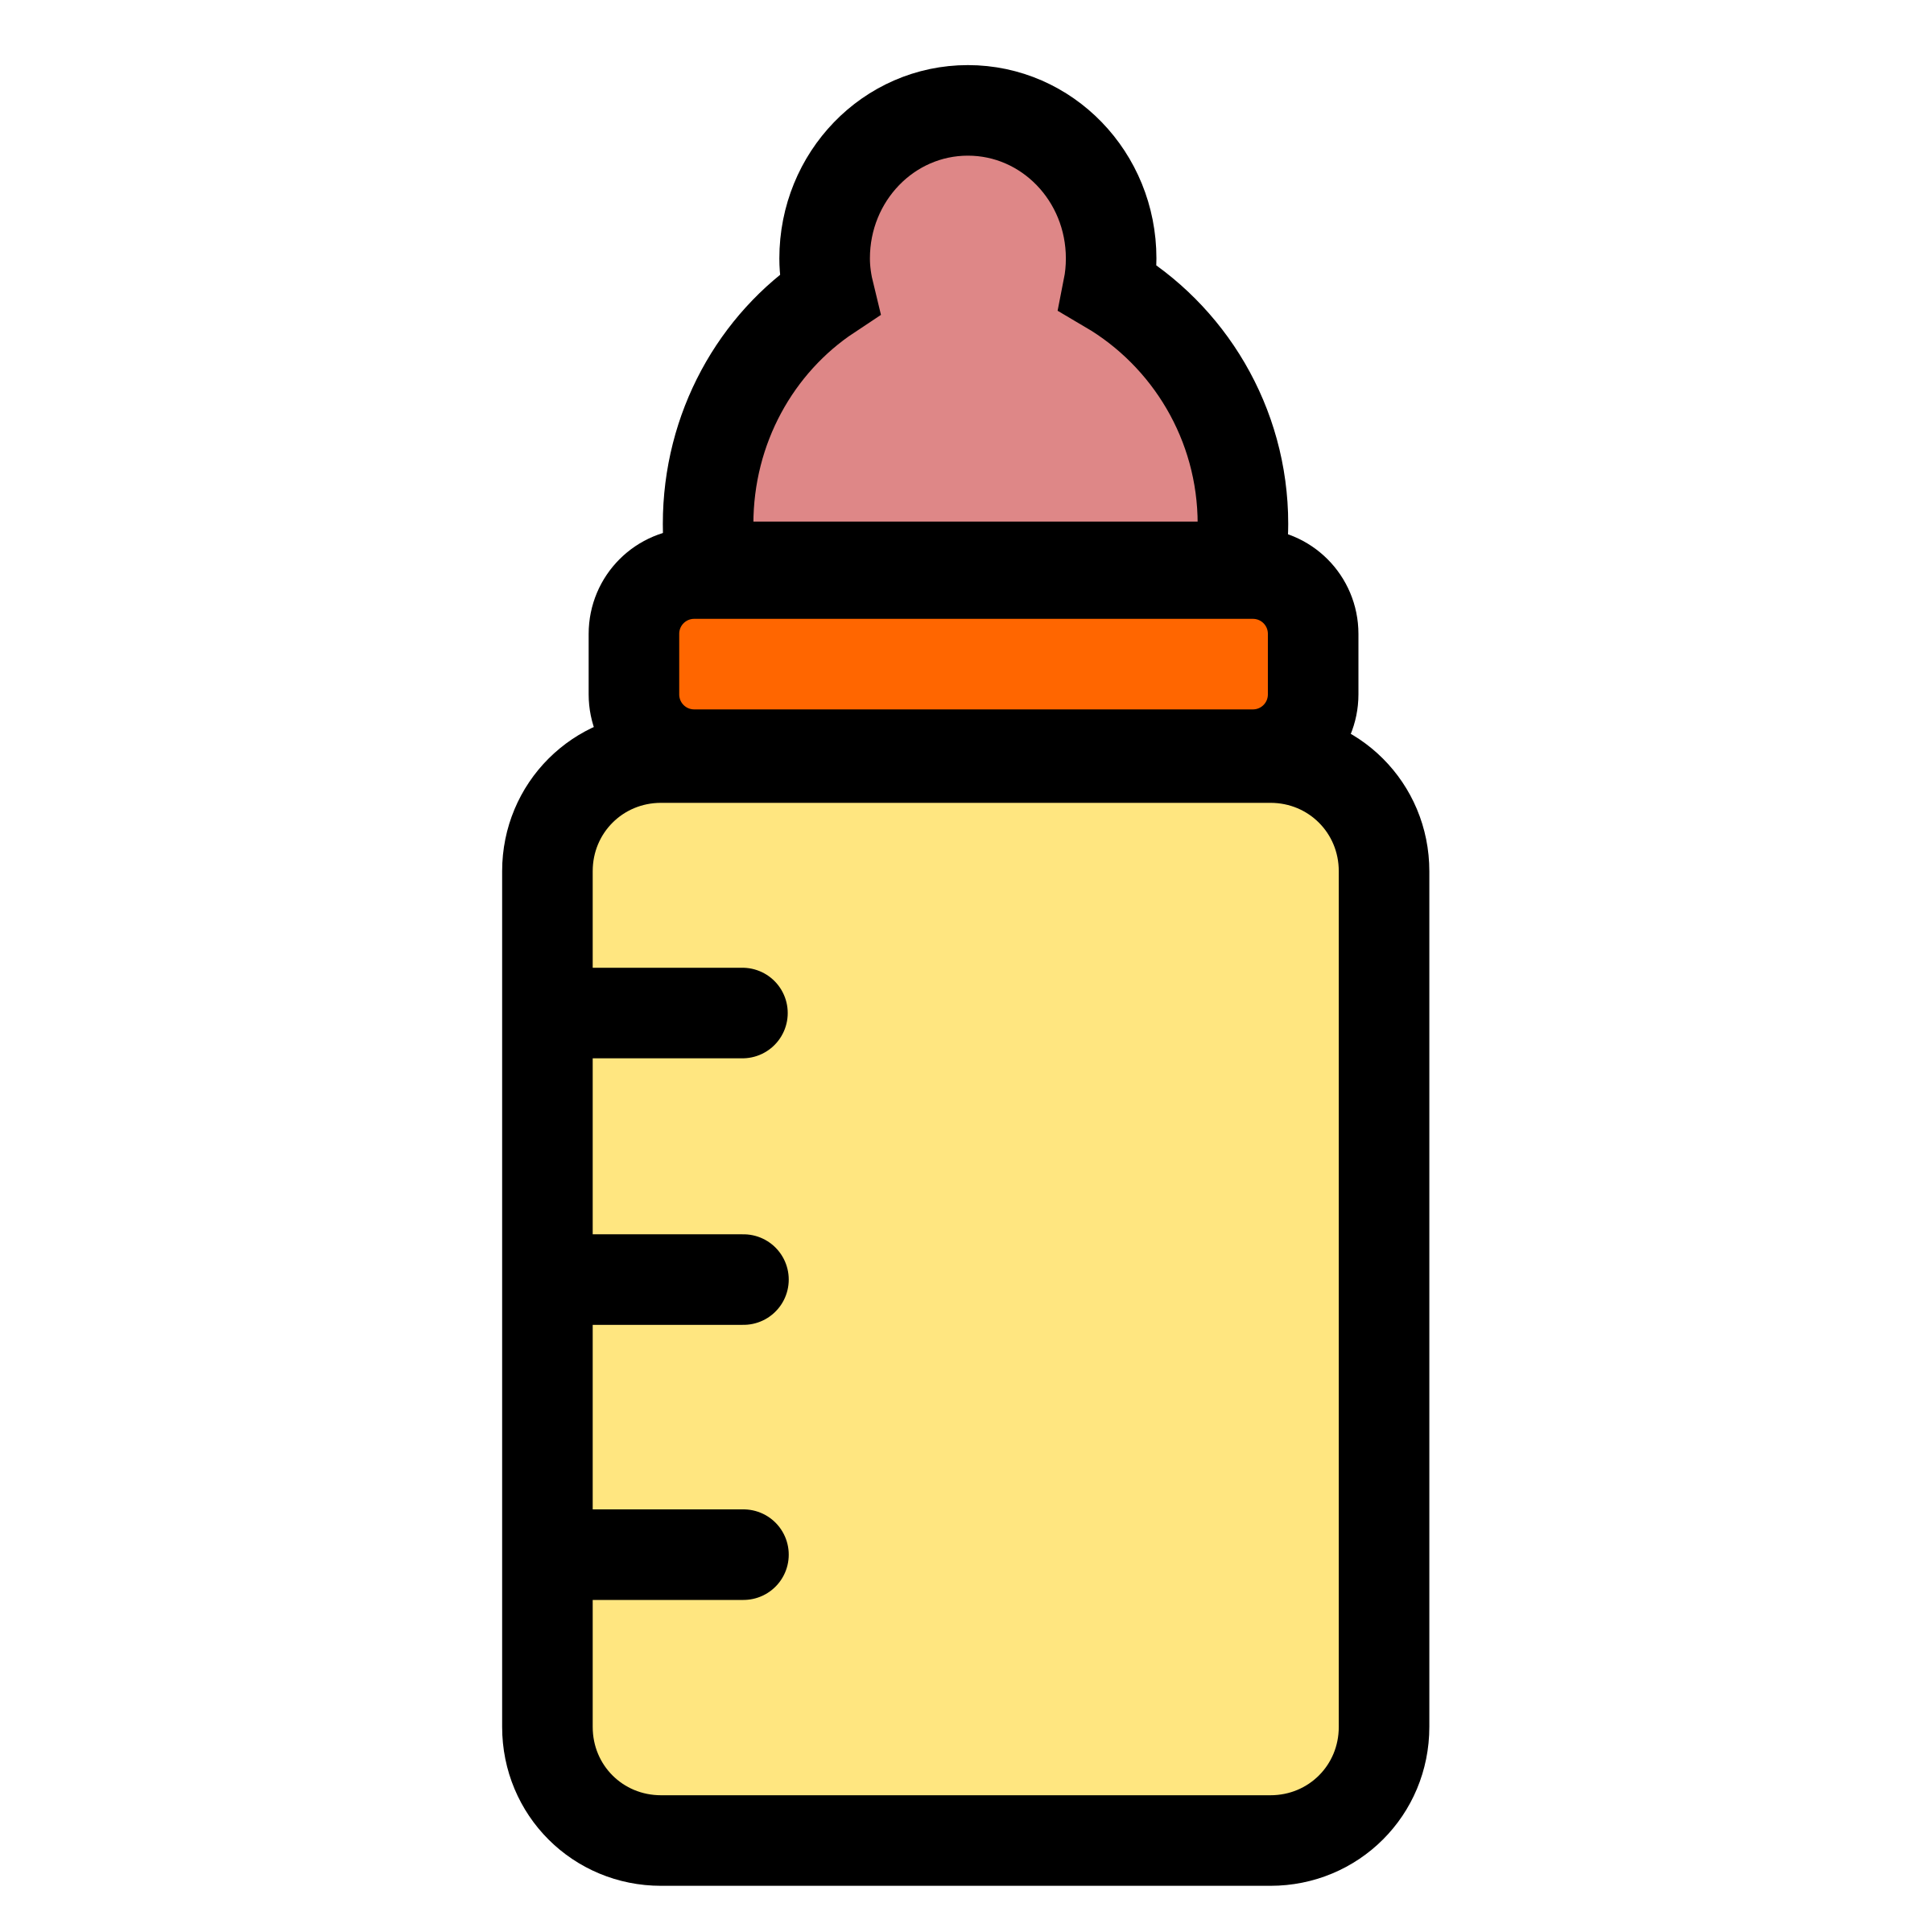 Baby clipart icon. Bottle big image png